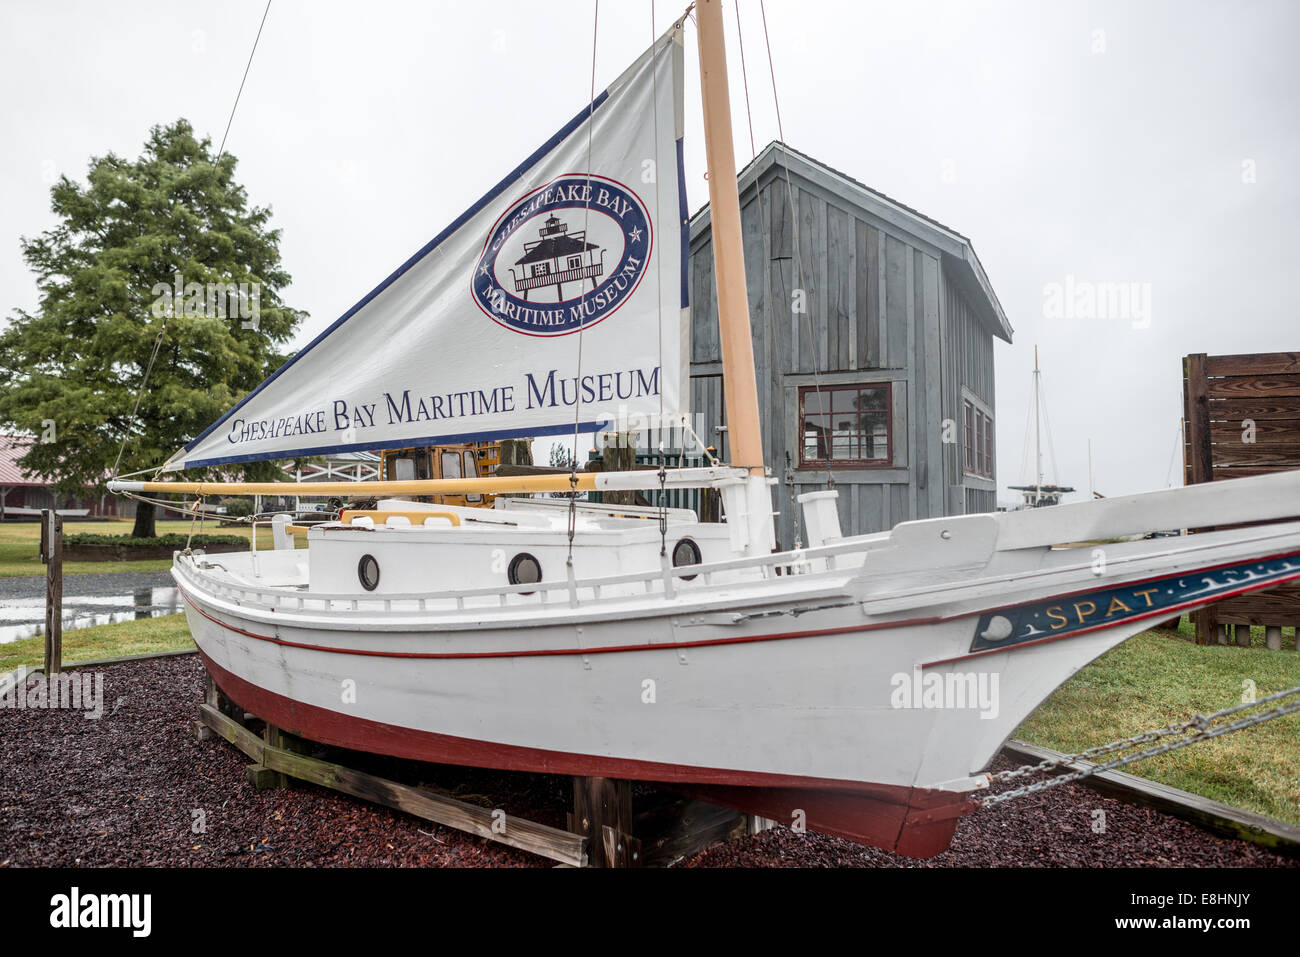 A traditional boat on display at the Chesapeake Bay Maritime Museum in St. Michaels on Maryland's Eastern Shore. Stock Photo